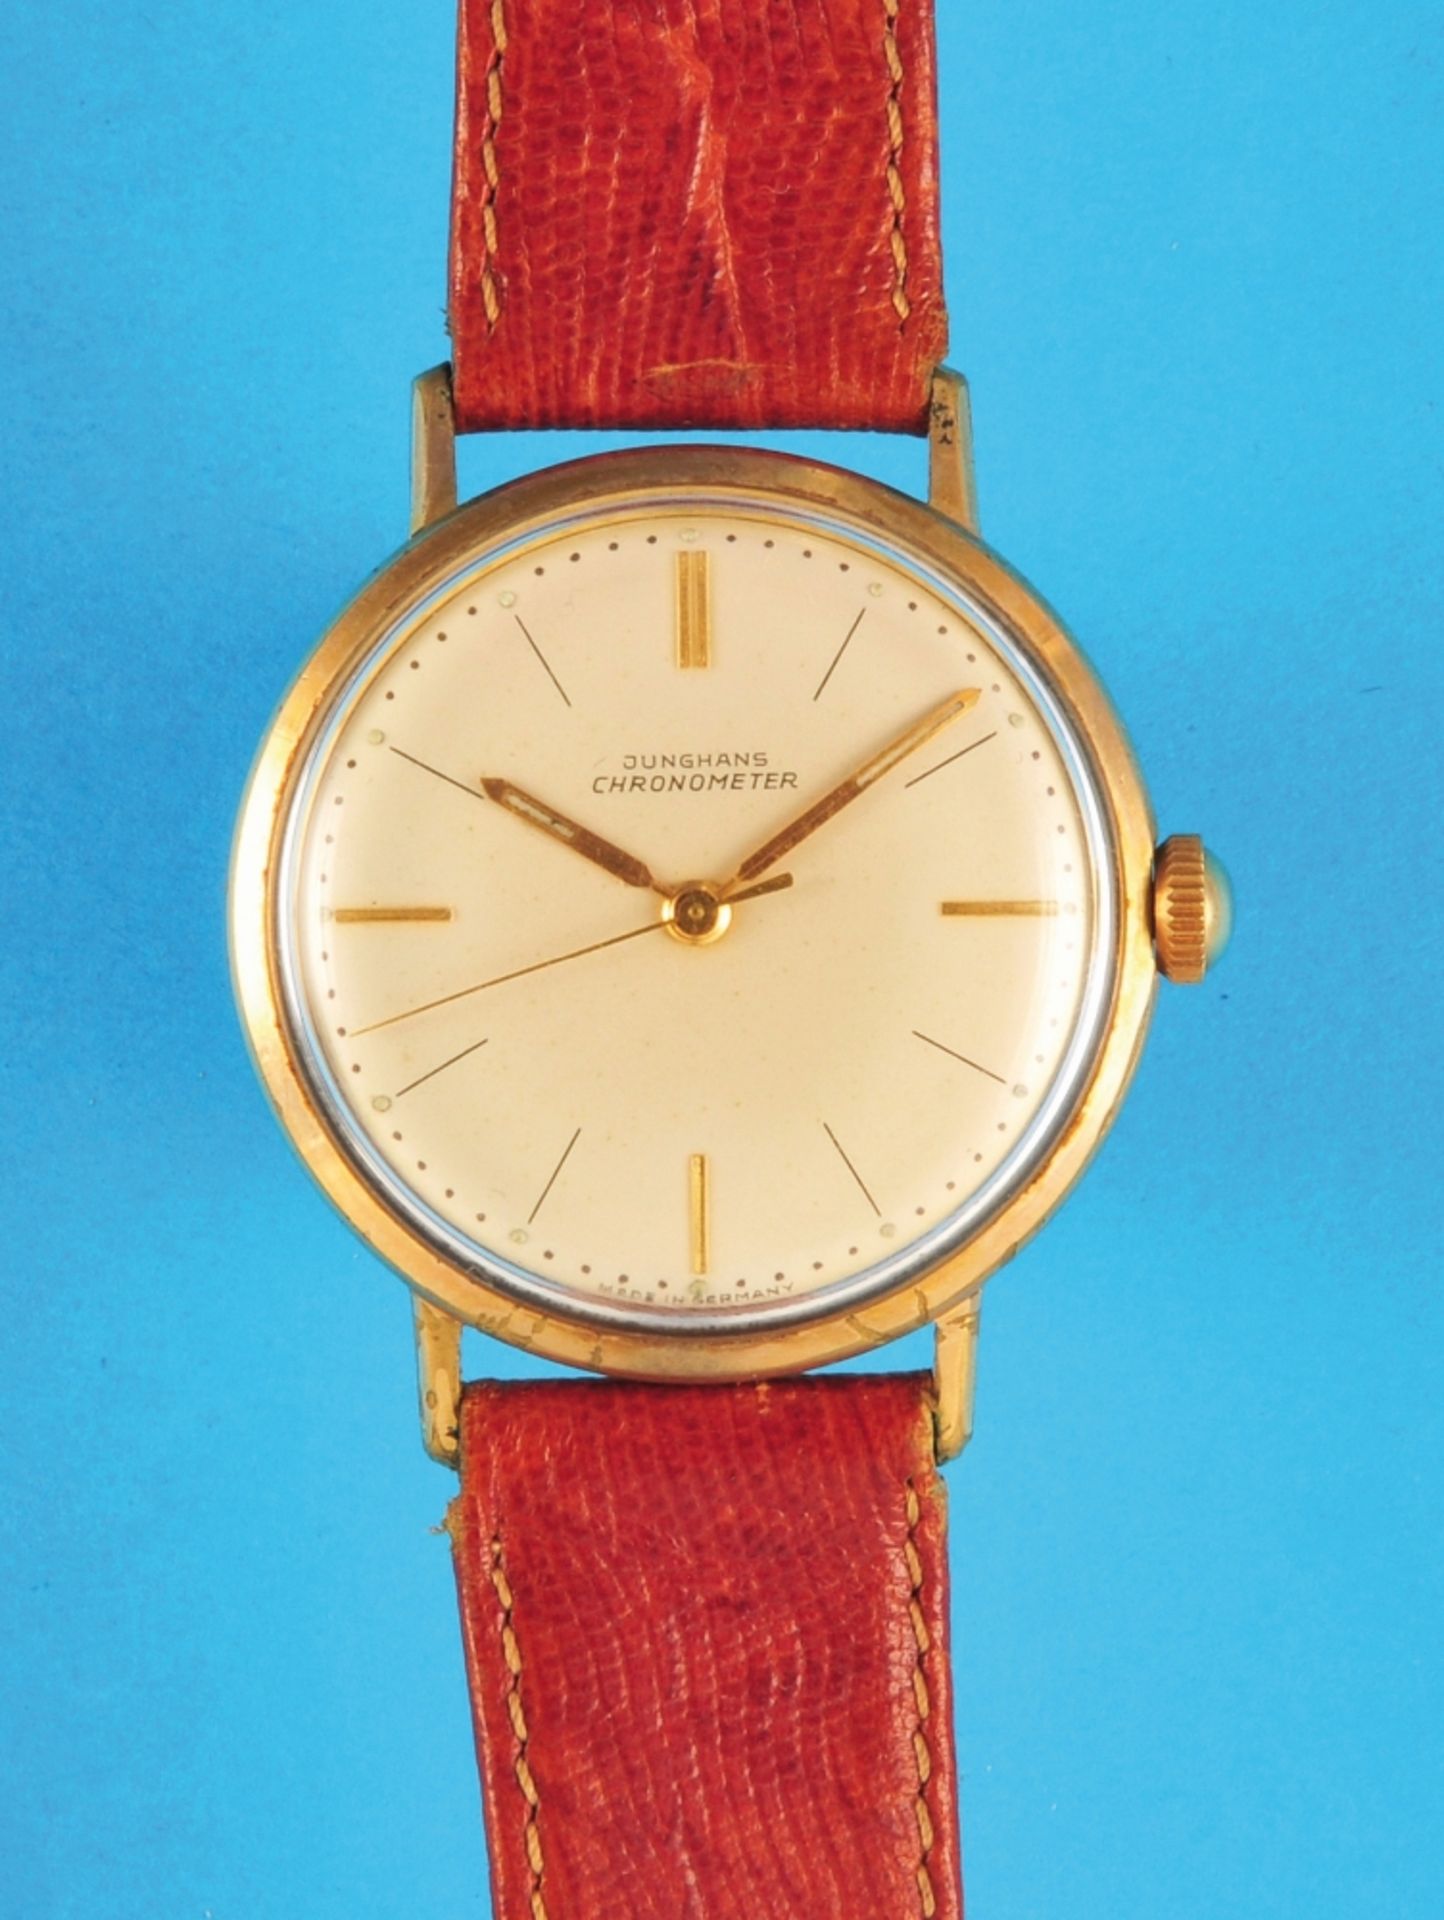 Junghans Chronometer Wristwatch with central second hand